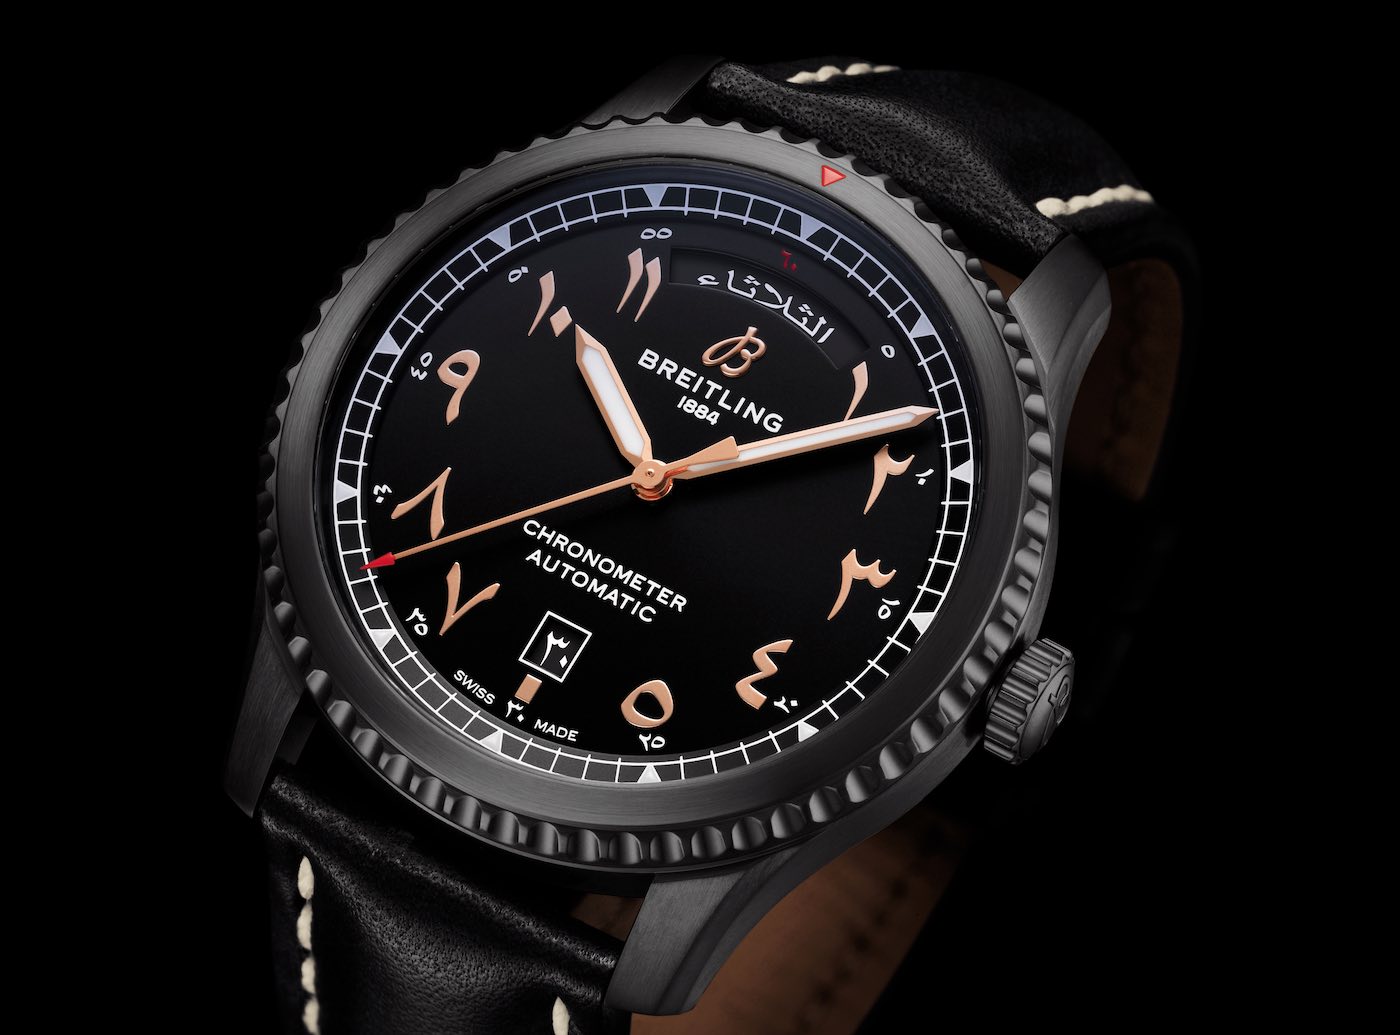 Breitling-Aviator-8-Day-And-Date-41-Etihad-Airways-Limited-Edition-Watch